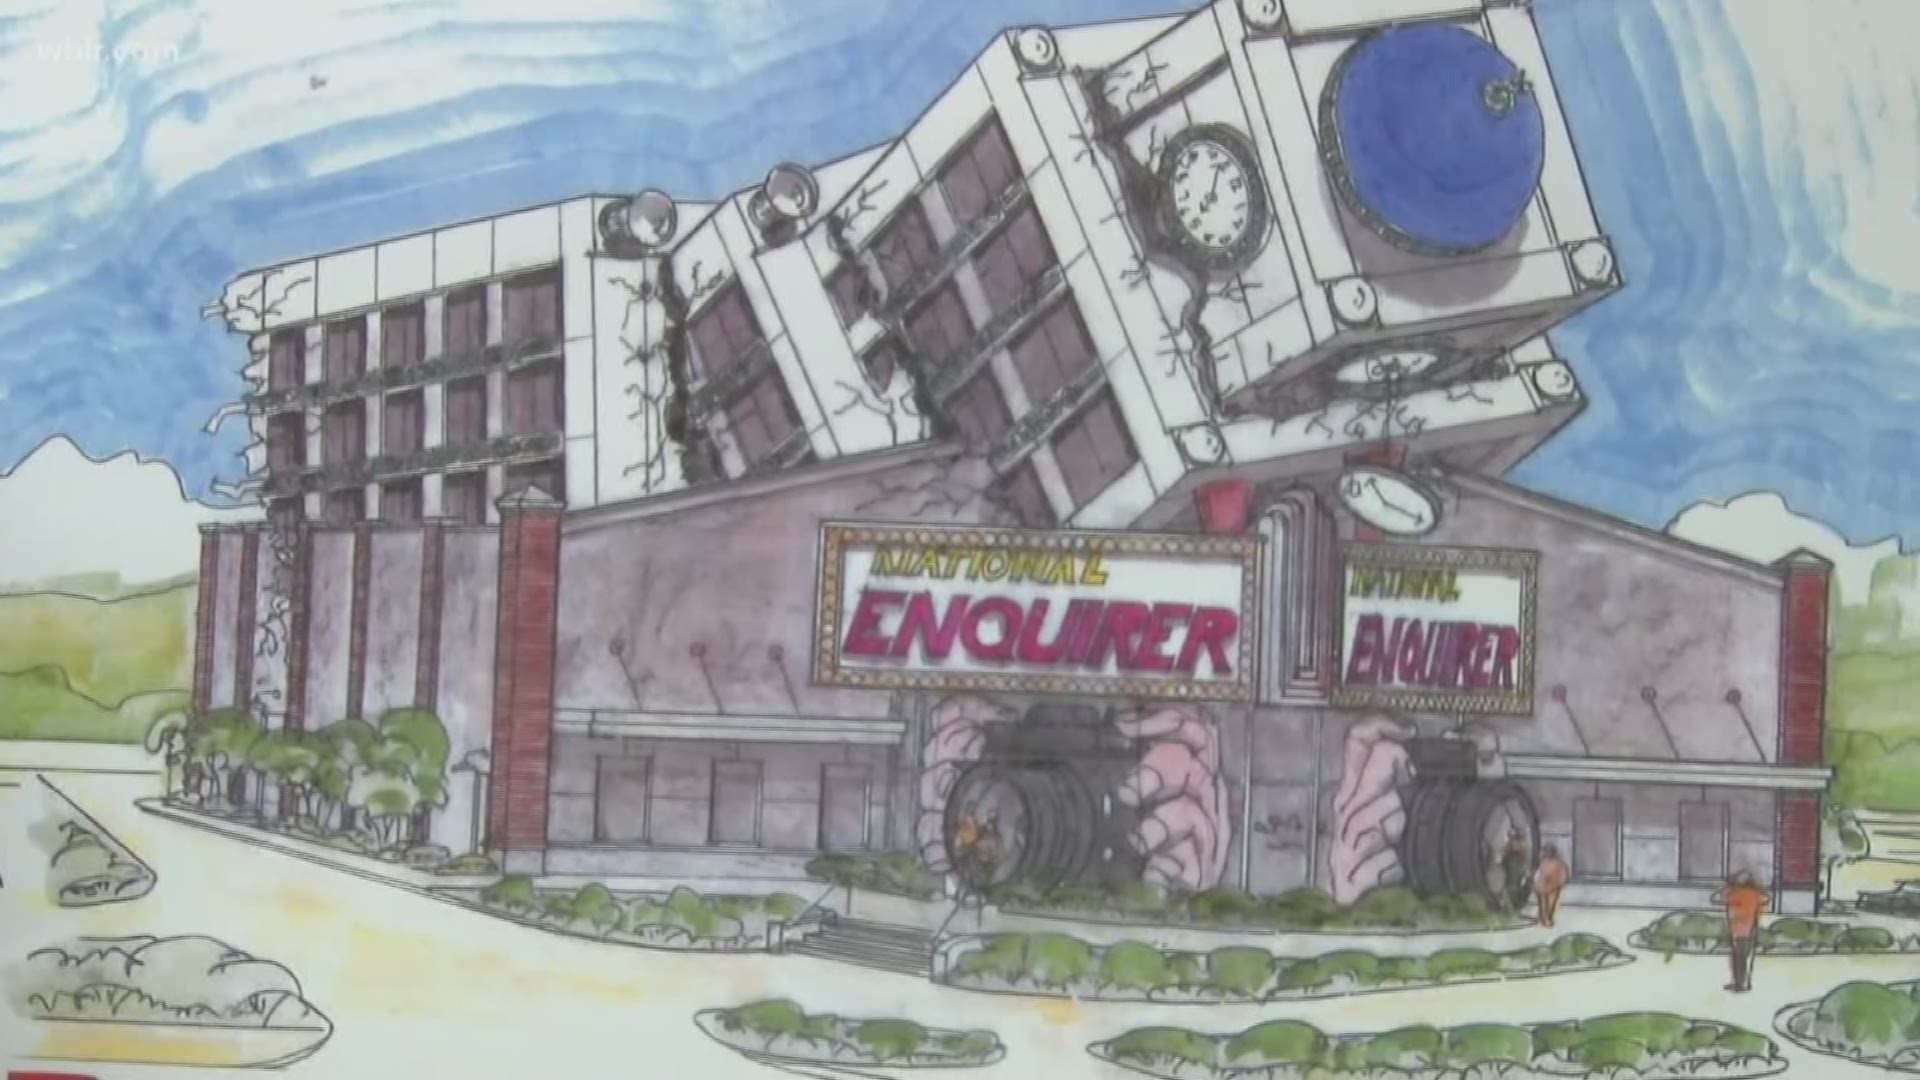 On Tuesday, the city planning commission approved the plans for The National Enquirer Museum, which would be built on the site of the former Smokey Mountain Jubilee on the Parkway, across from the Titanic Museum.